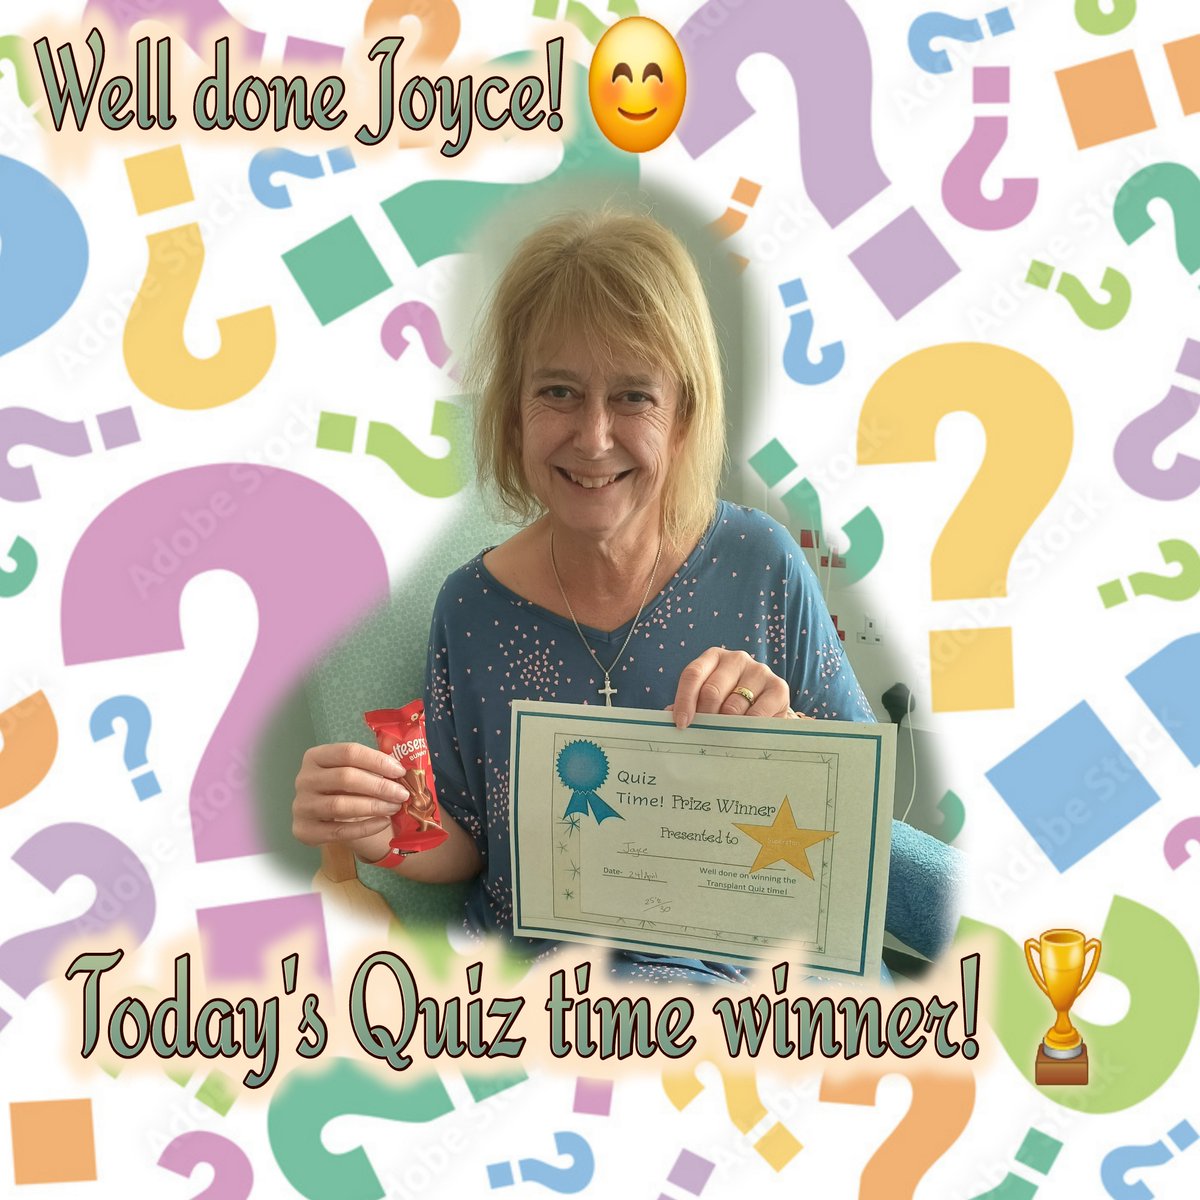 Todays Quiz time winner on JQ! Well done to Joyce, who scored a whopping 25 ½ out of 30! Lots of competition for the Malteser bunny today (still working through the Easter chocs😝) #Quizzes #brainhealth #quizzing #distraction @Michaela0895 @vikki_warman @TntTracy73 @parkerkarenj